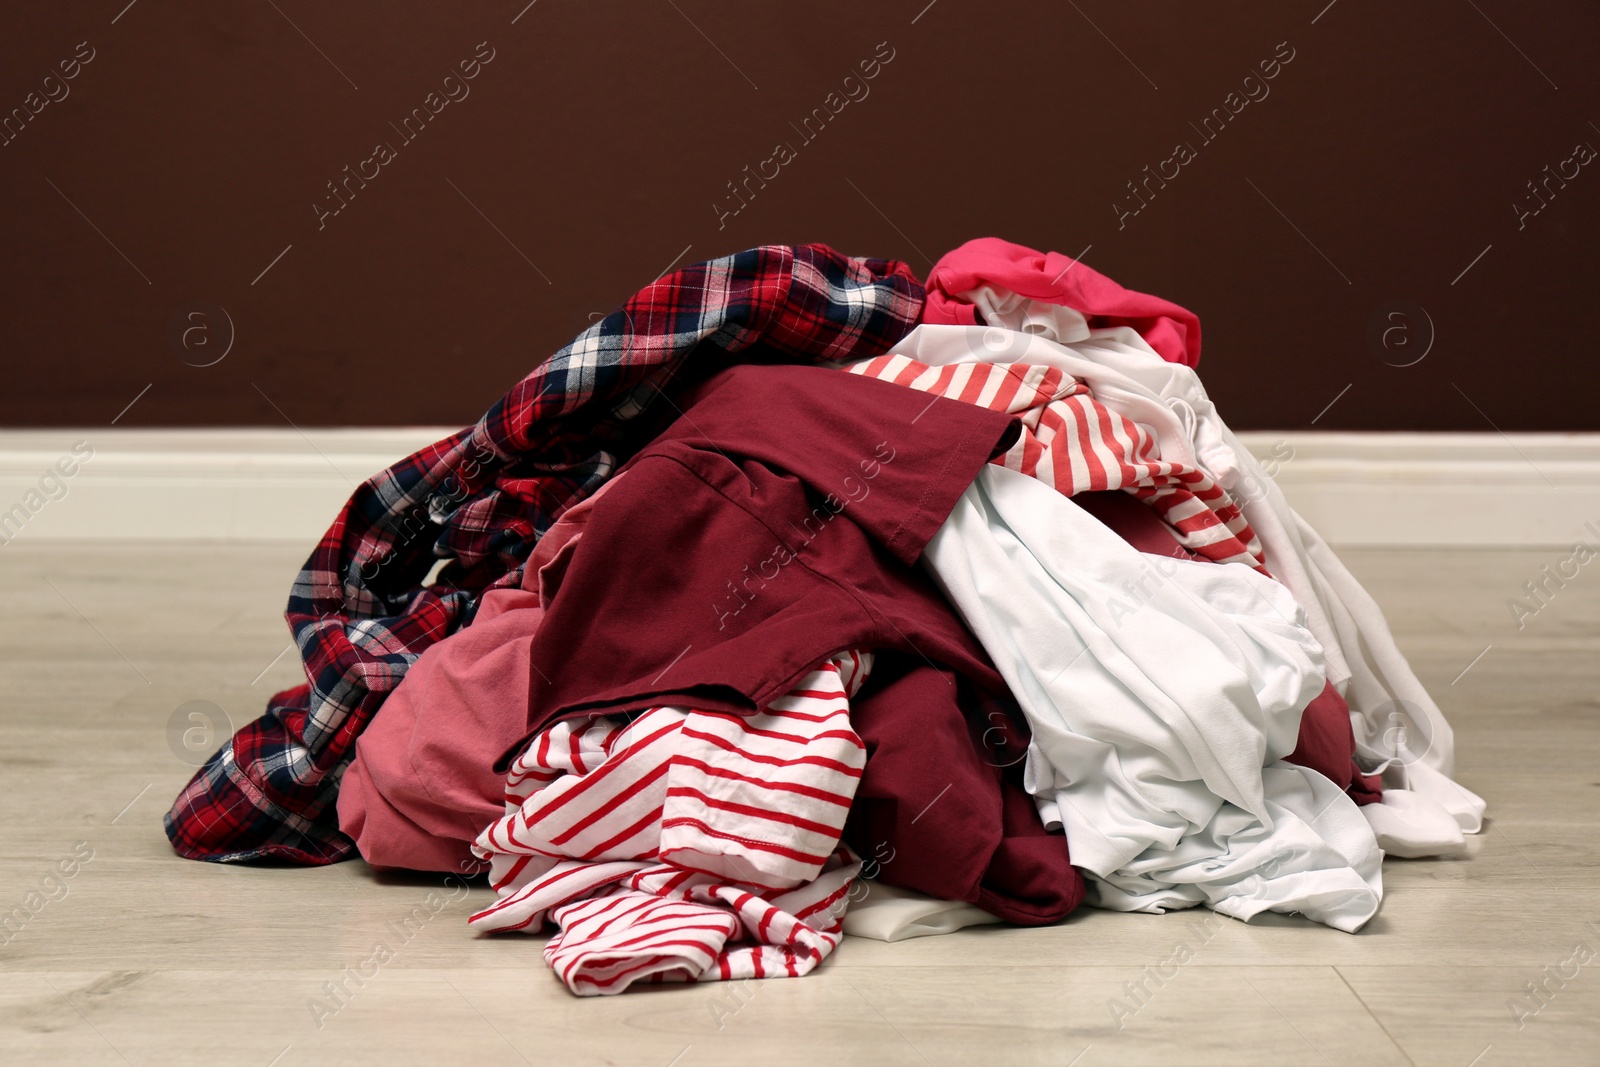 Photo of Pile of dirty clothes on floor near brown wall indoors